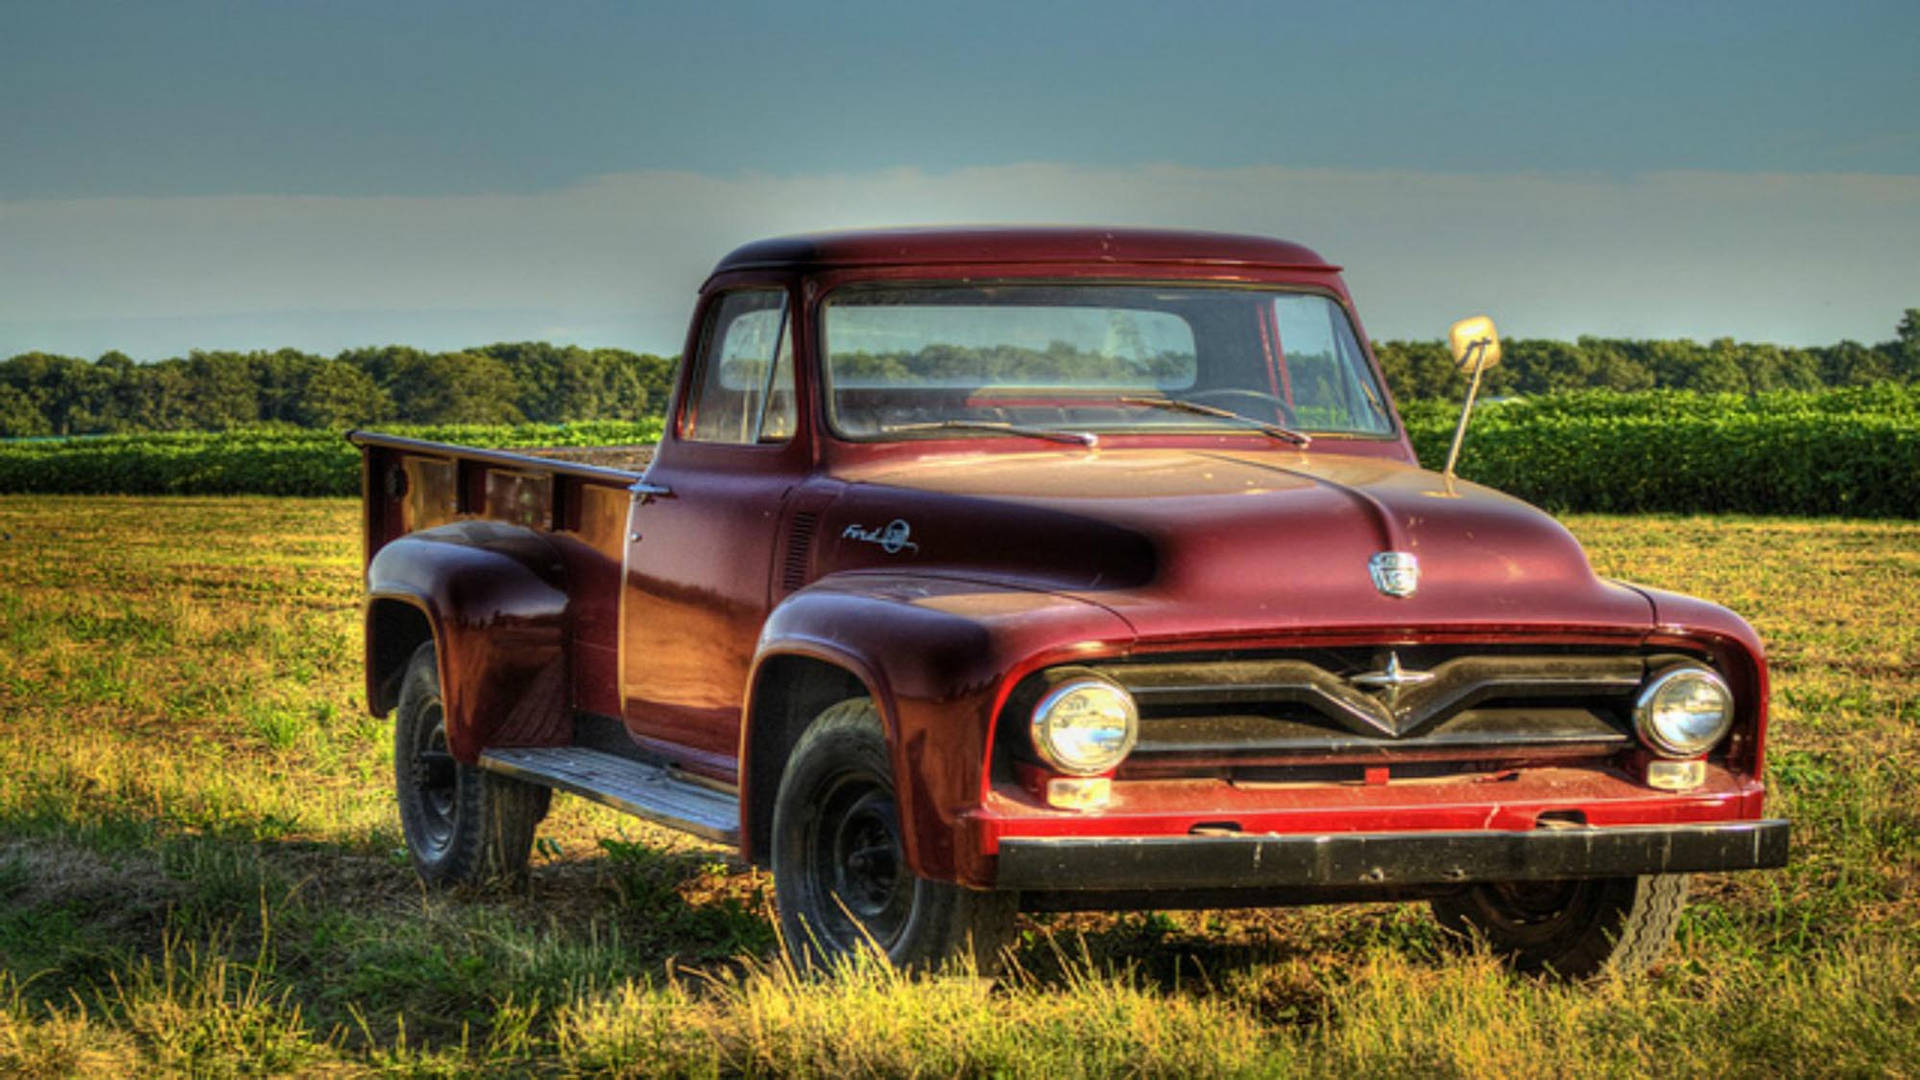 1953 Red Old Ford Truck